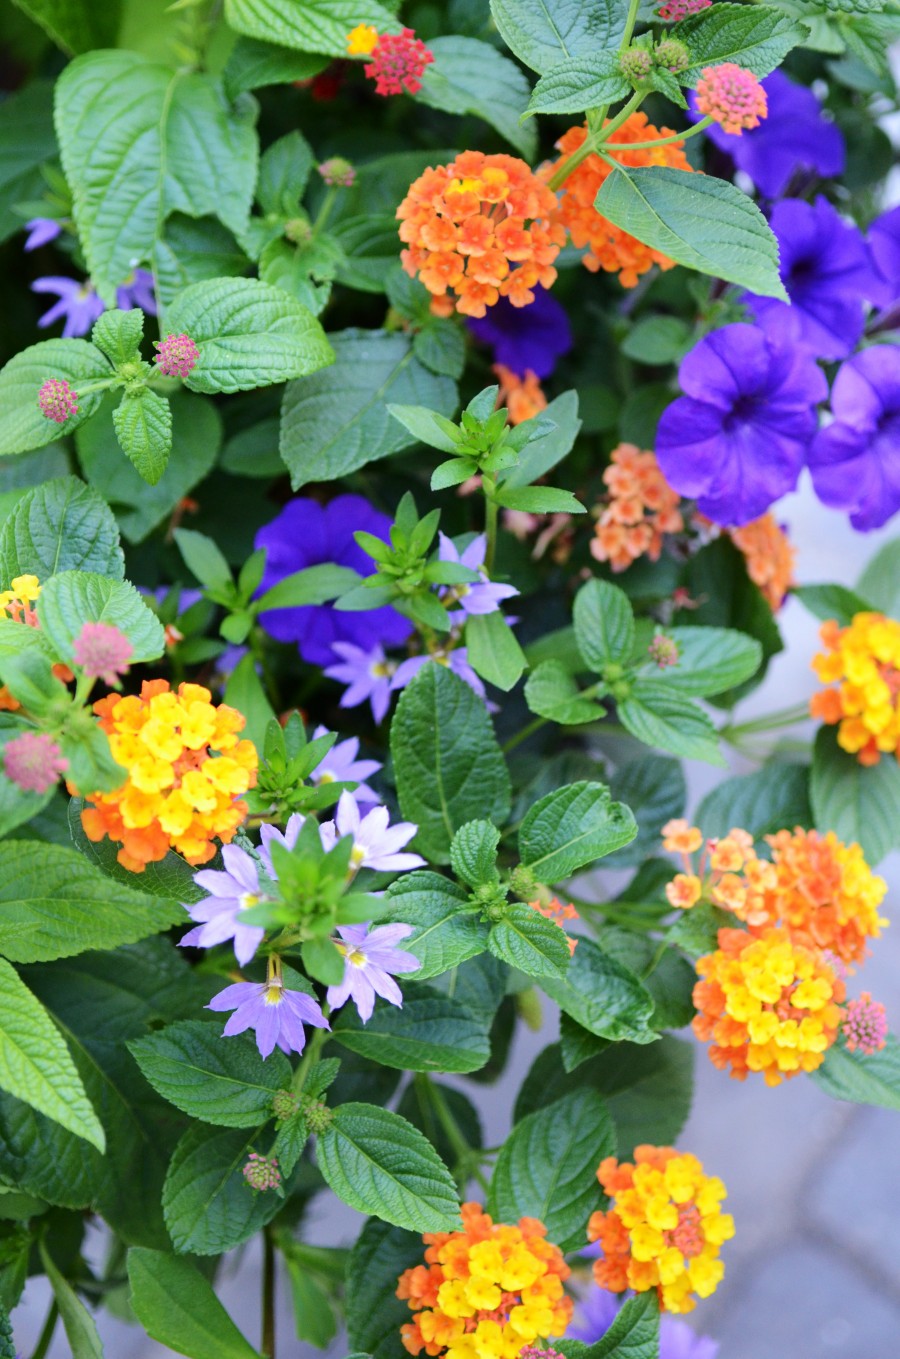 THE ANATOMY OF A FLOWER POT-HOW TO PLANT BEAUTIFUL BLOOMS TO LAST UNTIL FALL